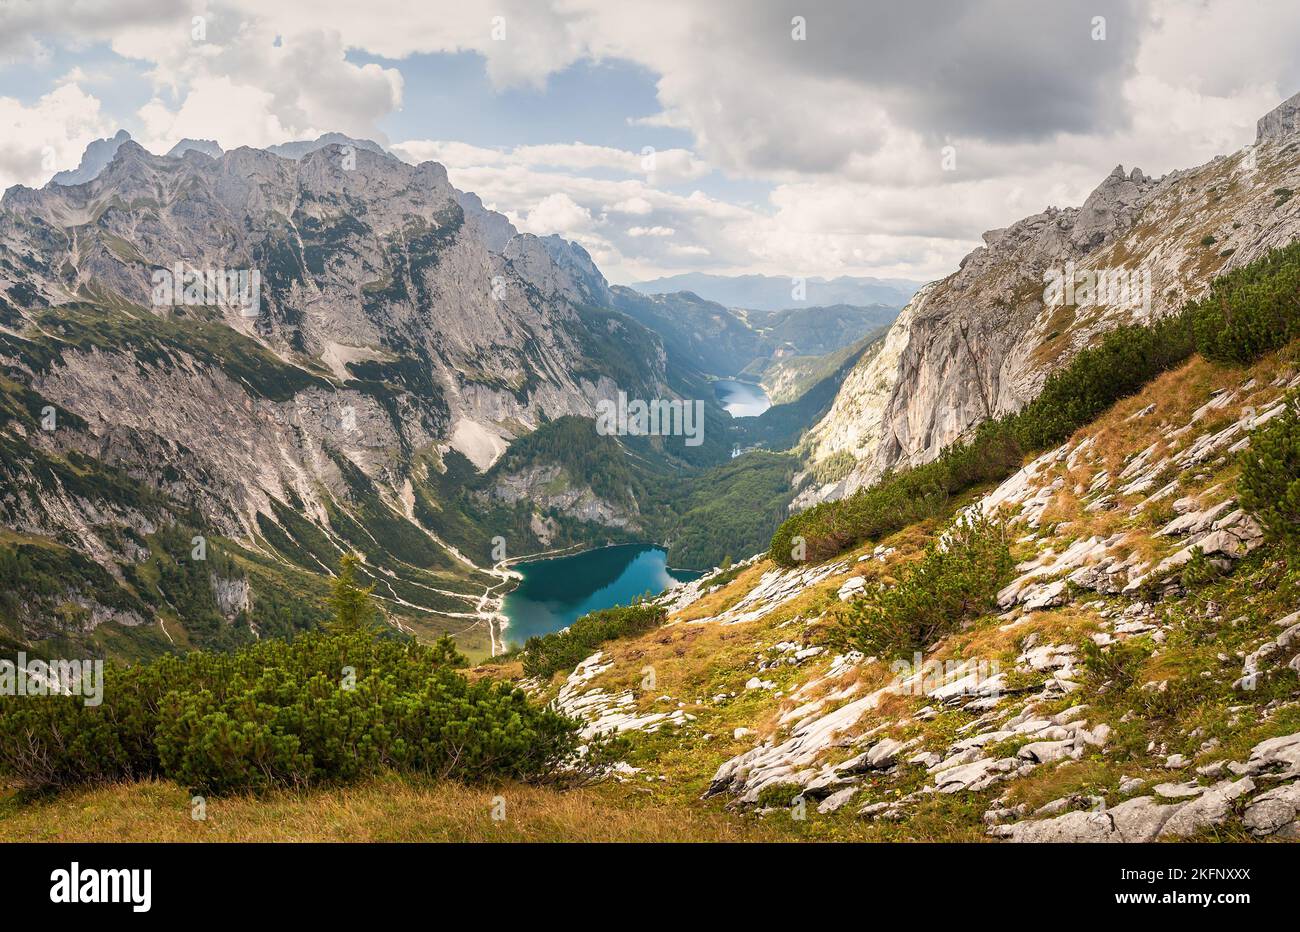 landscape with Gosausee lake in the mountain valley, Gosauseen lakes in the Dachstein Mountains in the Alps in Austria Stock Photo